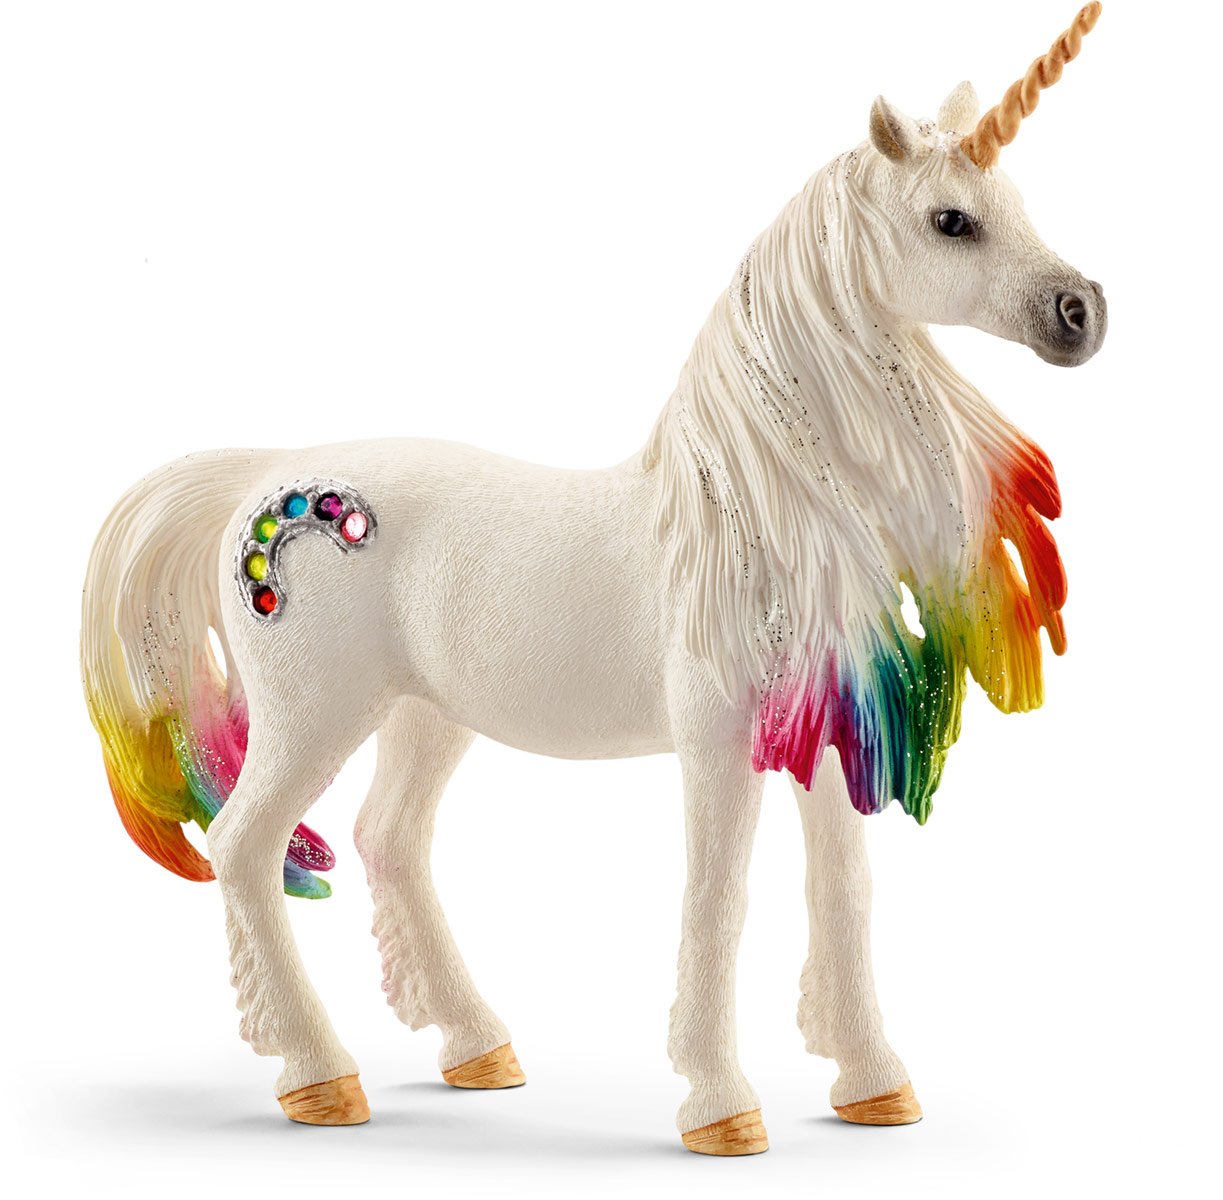 23 Best Unicorn Toys and Gifts for Girls 2022 - Review & Buying Guide 8